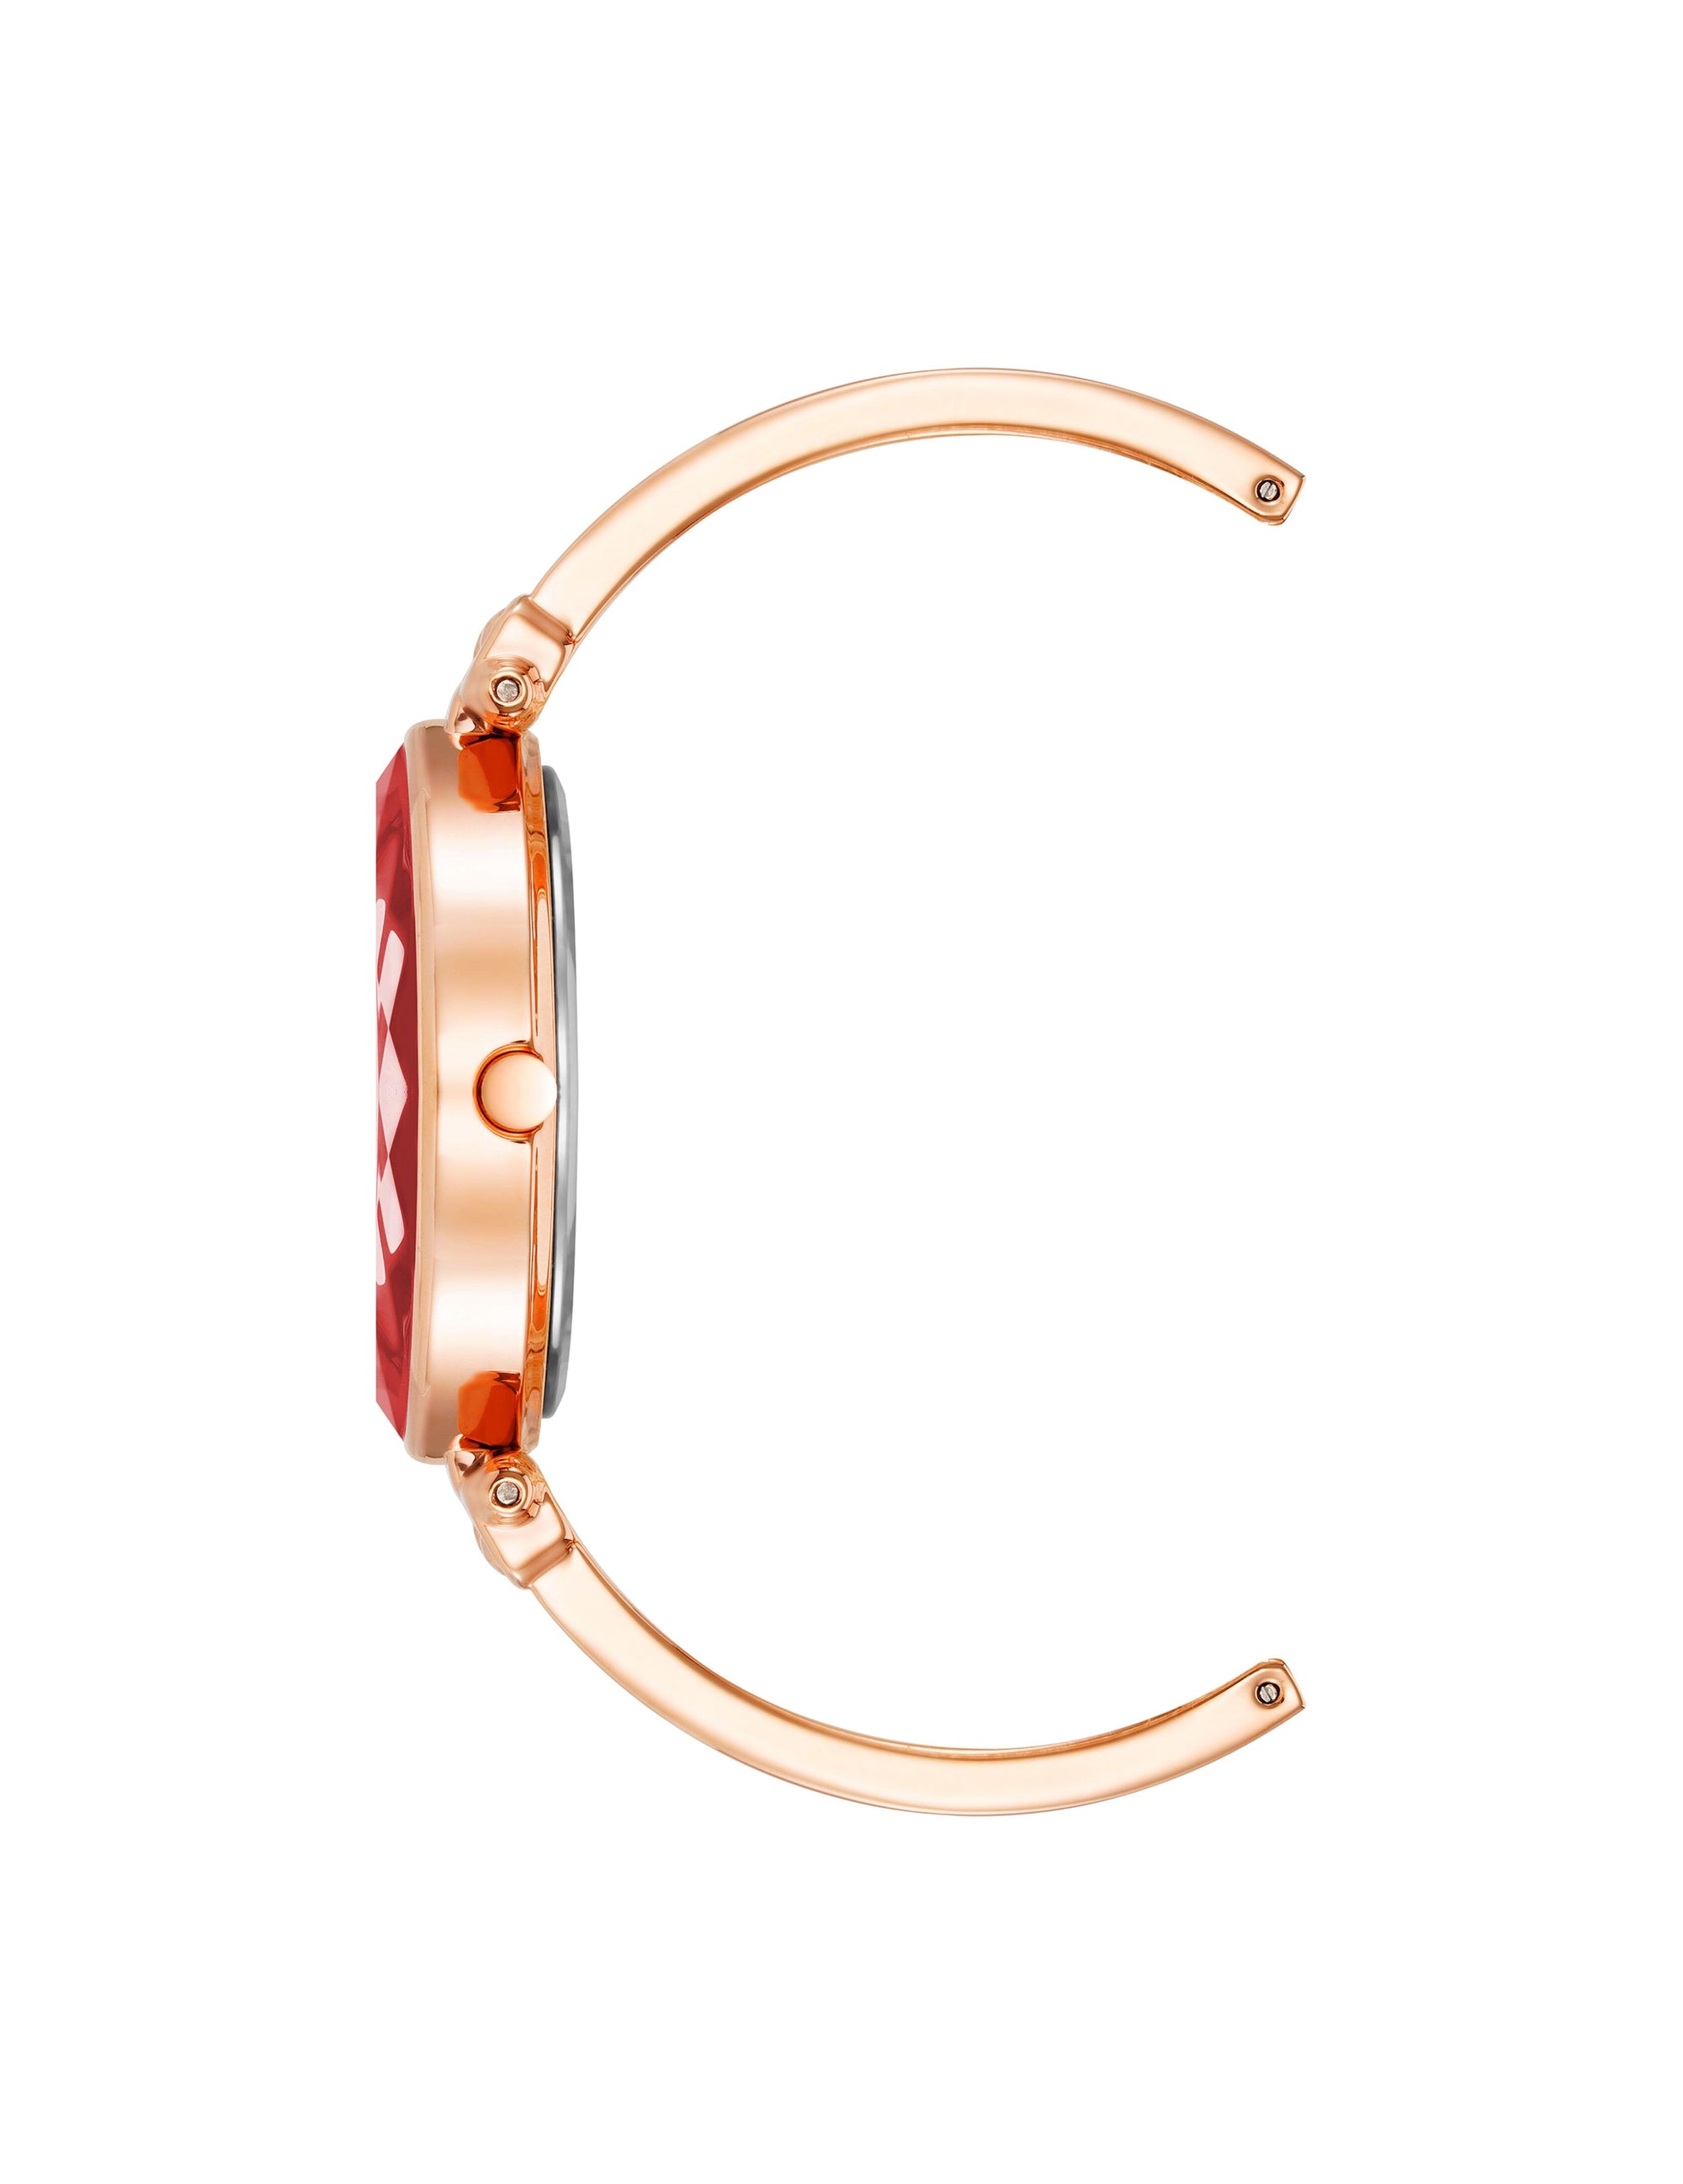 Anne Klein Rose Gold-Tone/ Red Diamond Accented Oval Bangle Watch